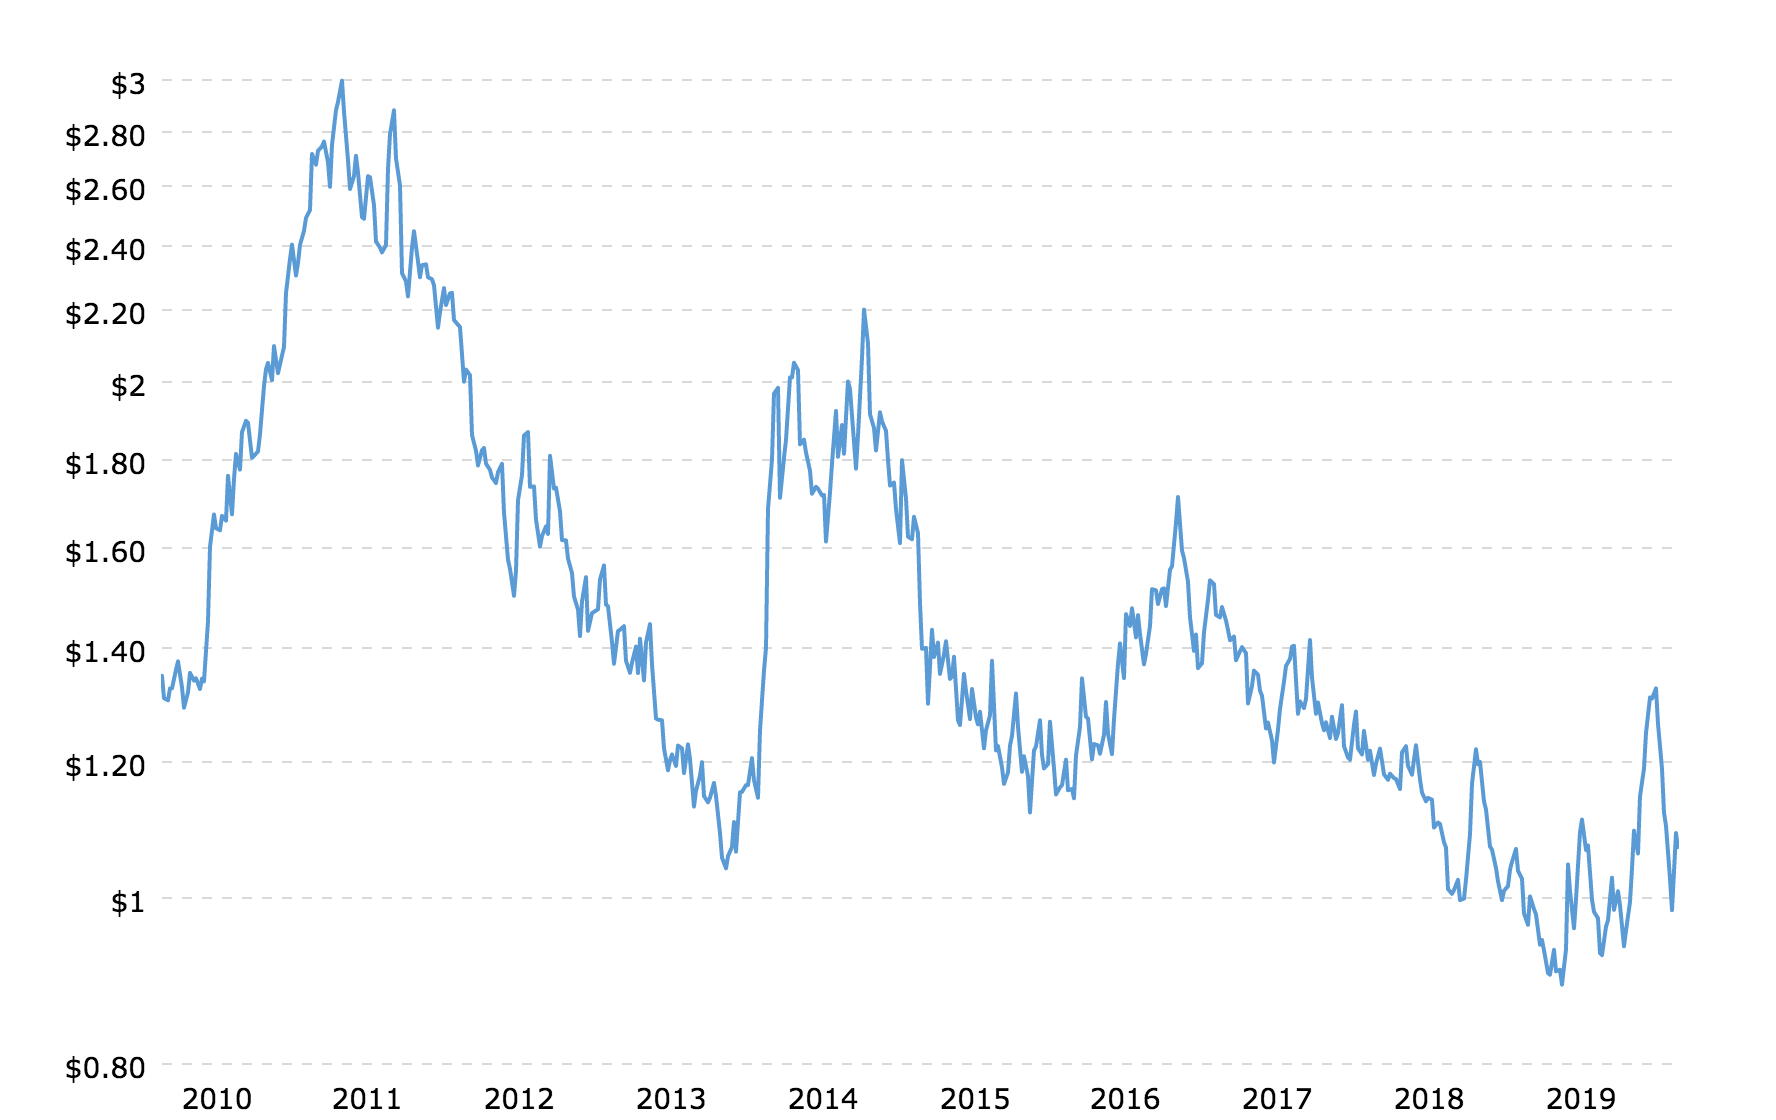 10-year coffee prices